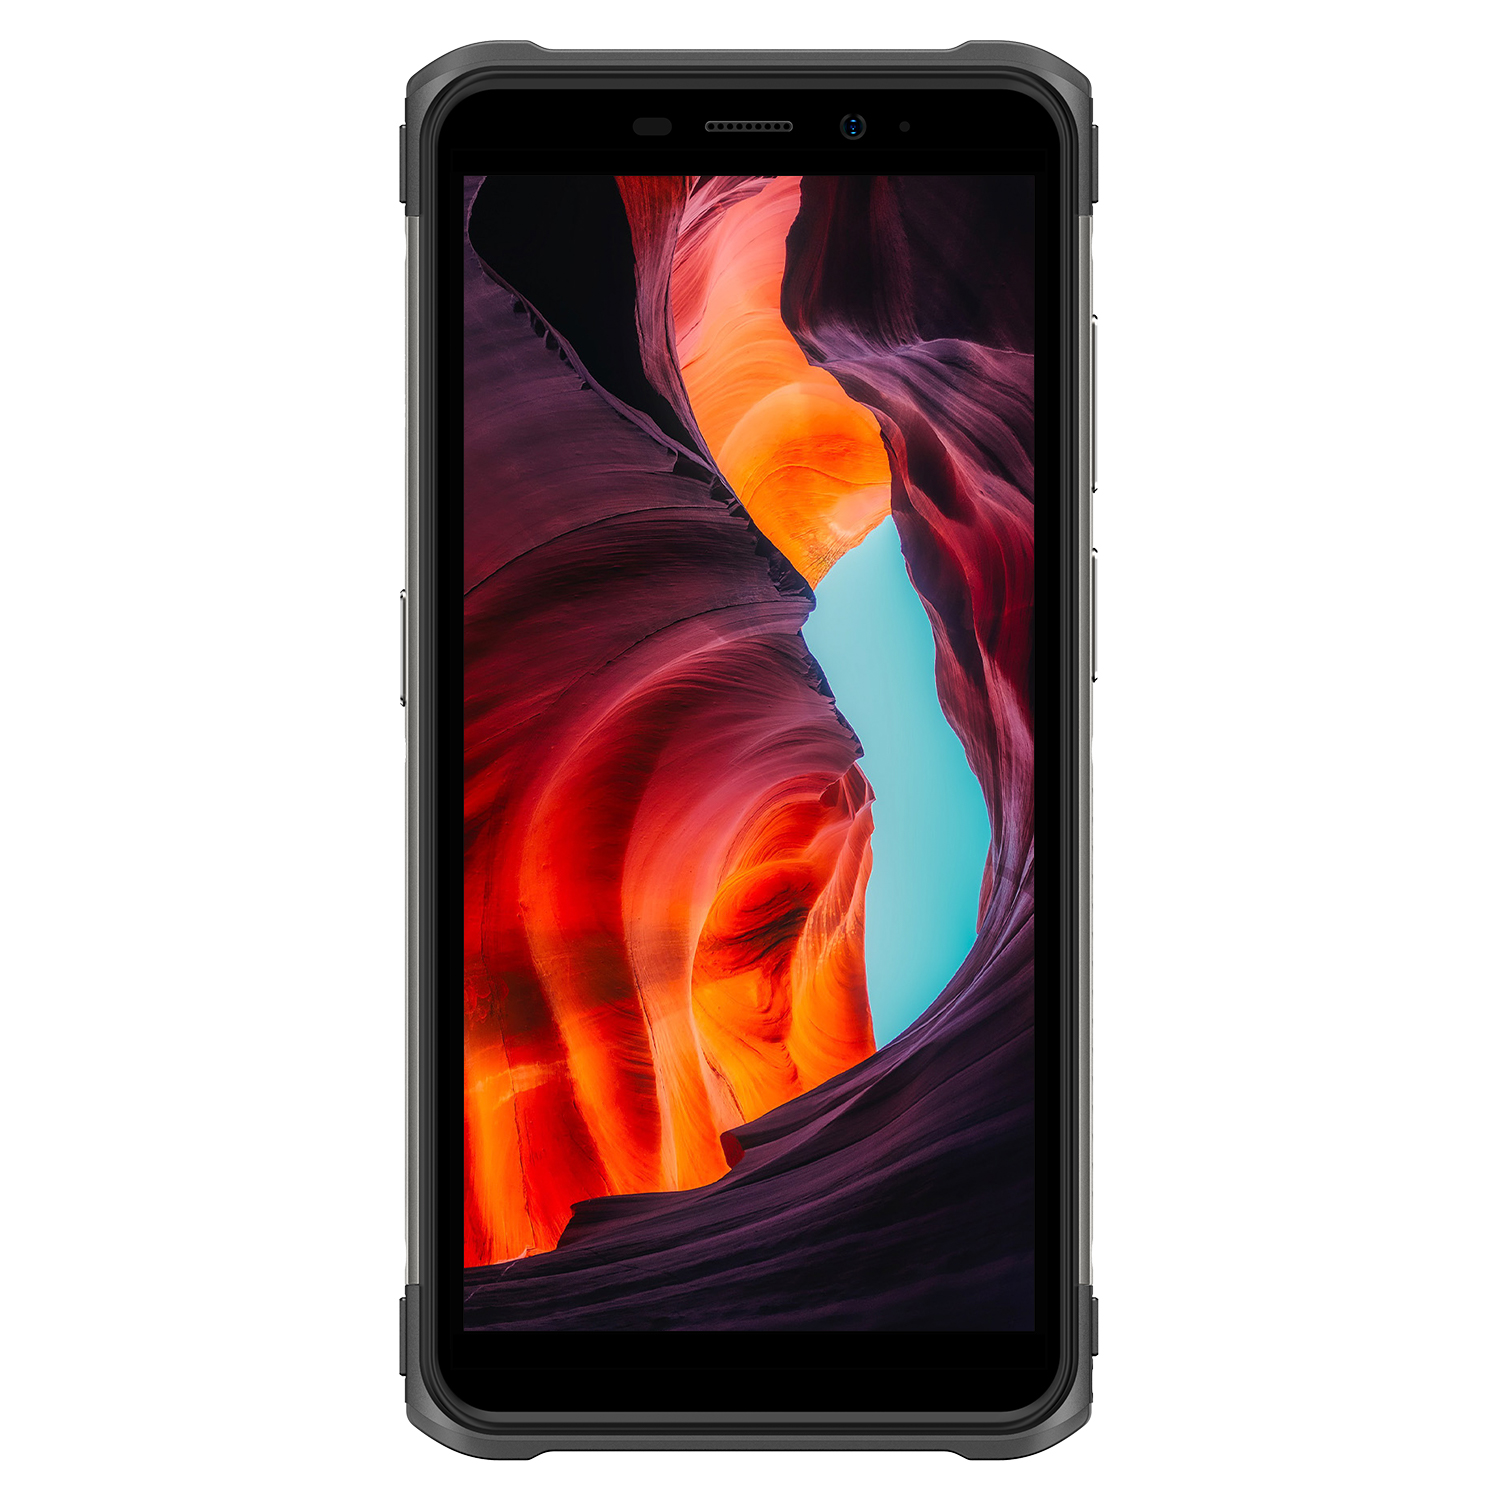 Find Ulefone Armor X10 Pro Global Version Helio P22 4GB 64GB 5.45 inch 60Hz Refresh Rate 5180mAh IP68 IP69K Android 11 Rugged 4G Smartphone for Sale on Gipsybee.com with cryptocurrencies